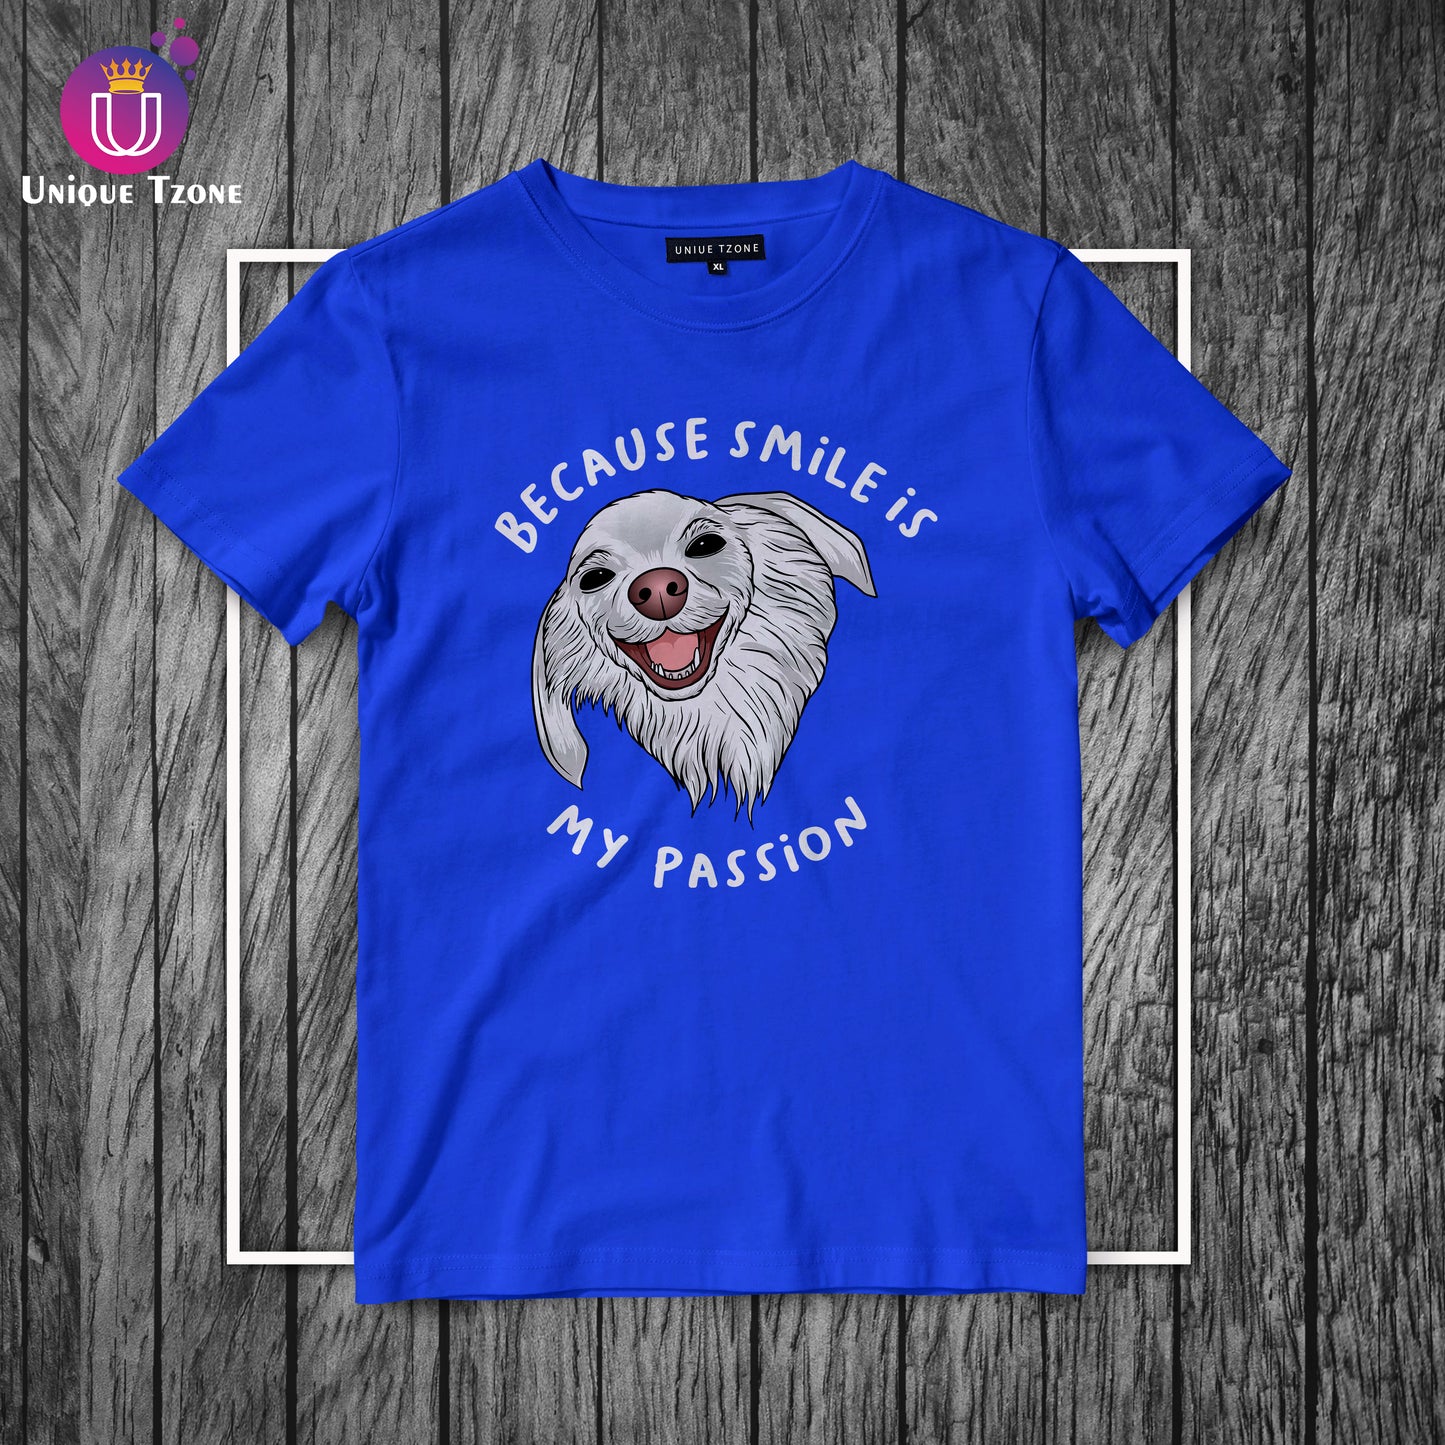 Because Smile Is My Passion Half Sleeve Cotton T-shirt